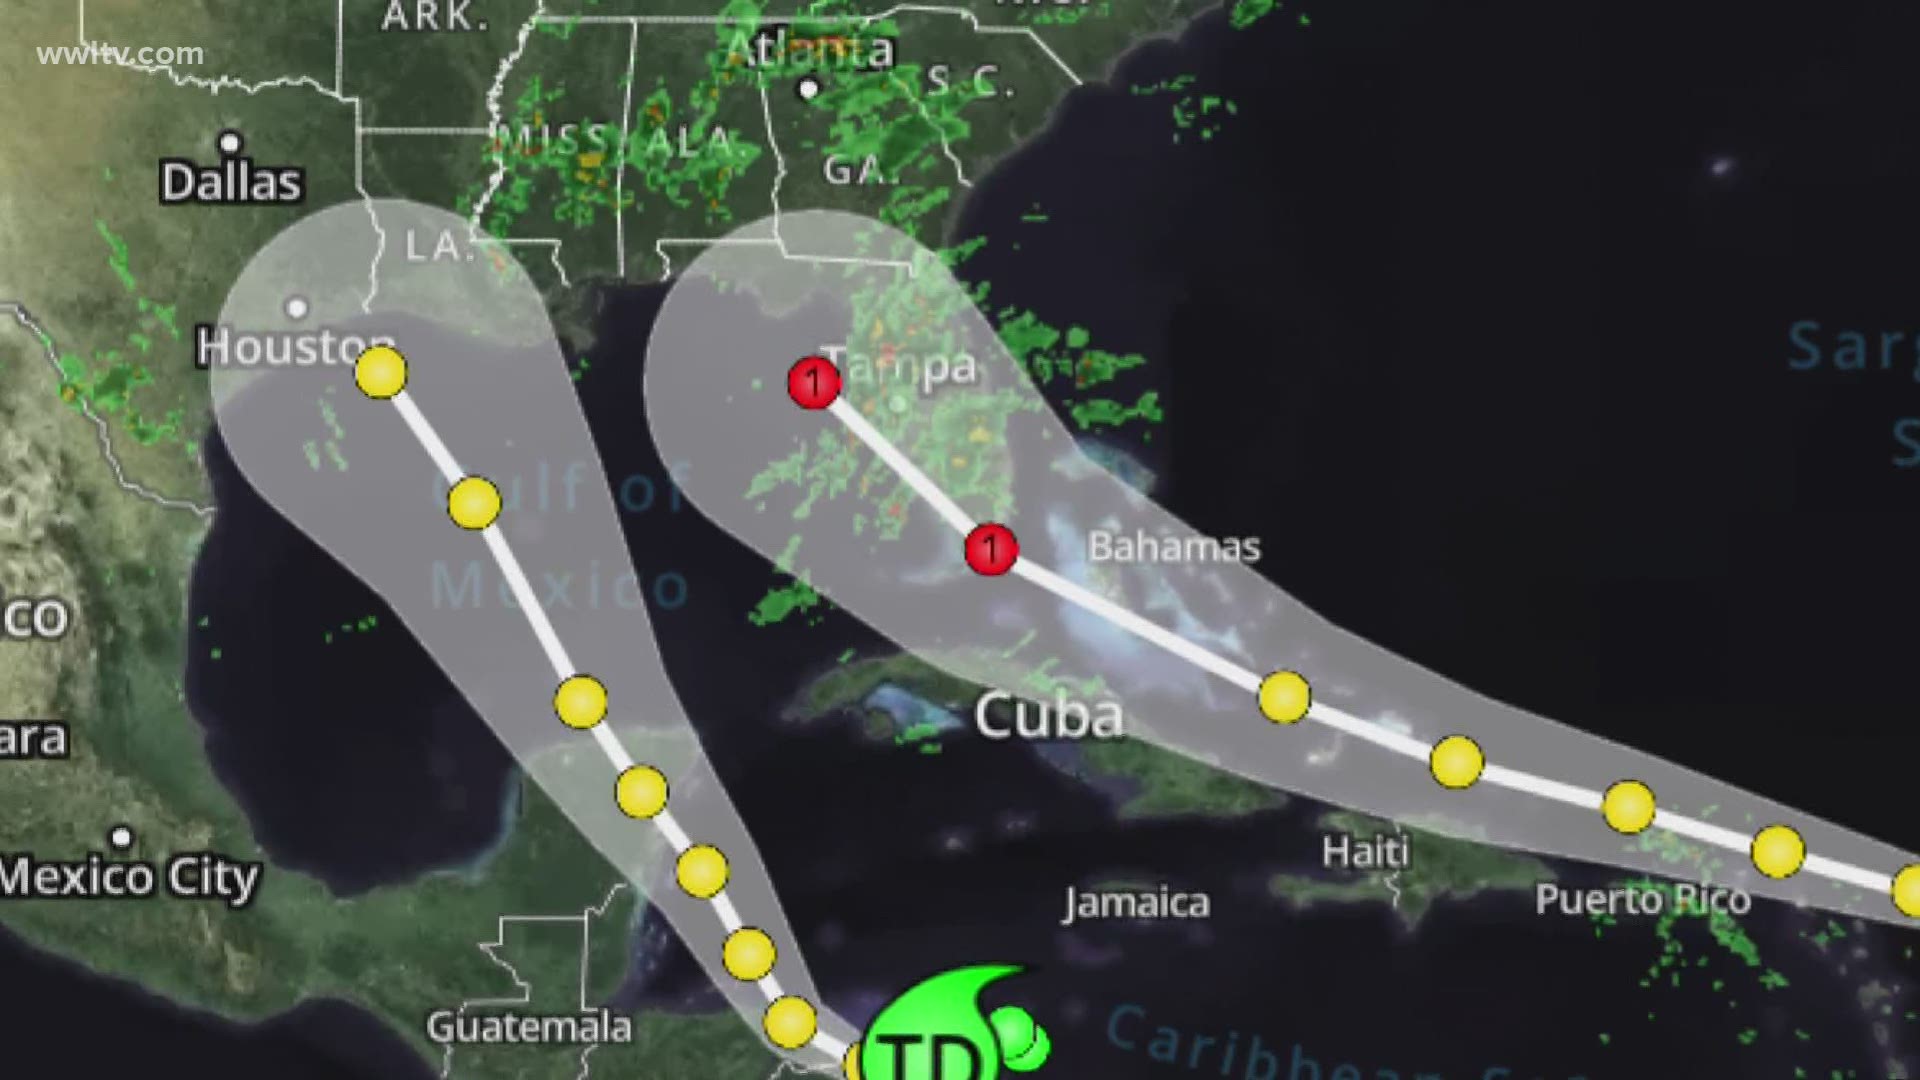 “It will be interesting to see what two storms do in the Gulf,” said Valiente. “We’re in a standby wait and see mode, but we’re 110% storm ready right now.”